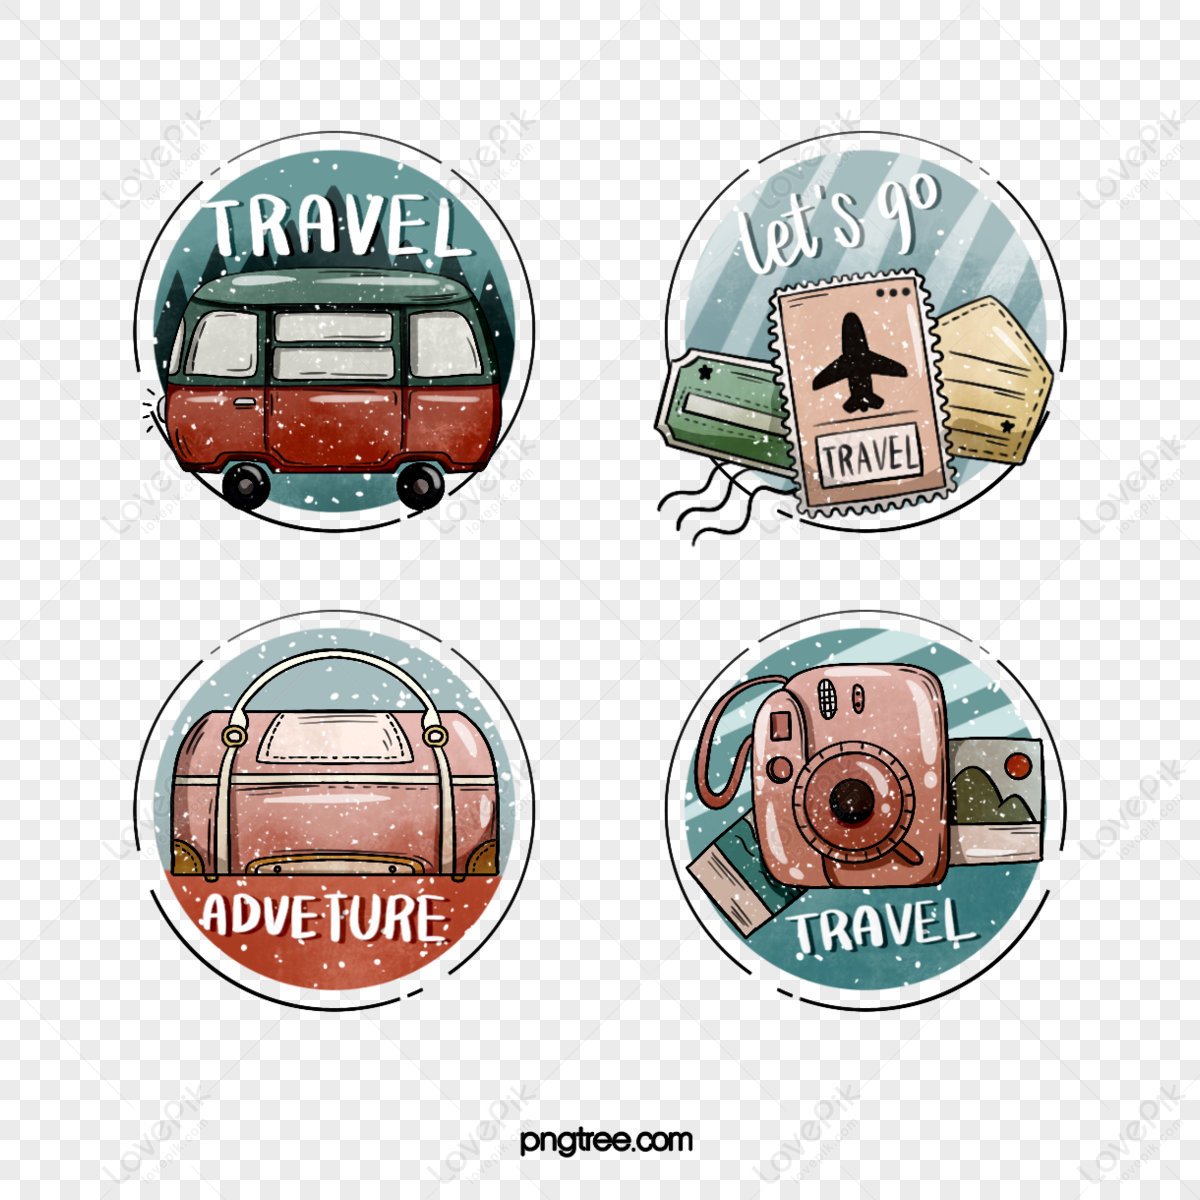 Travel Stickers - Free travel Stickers